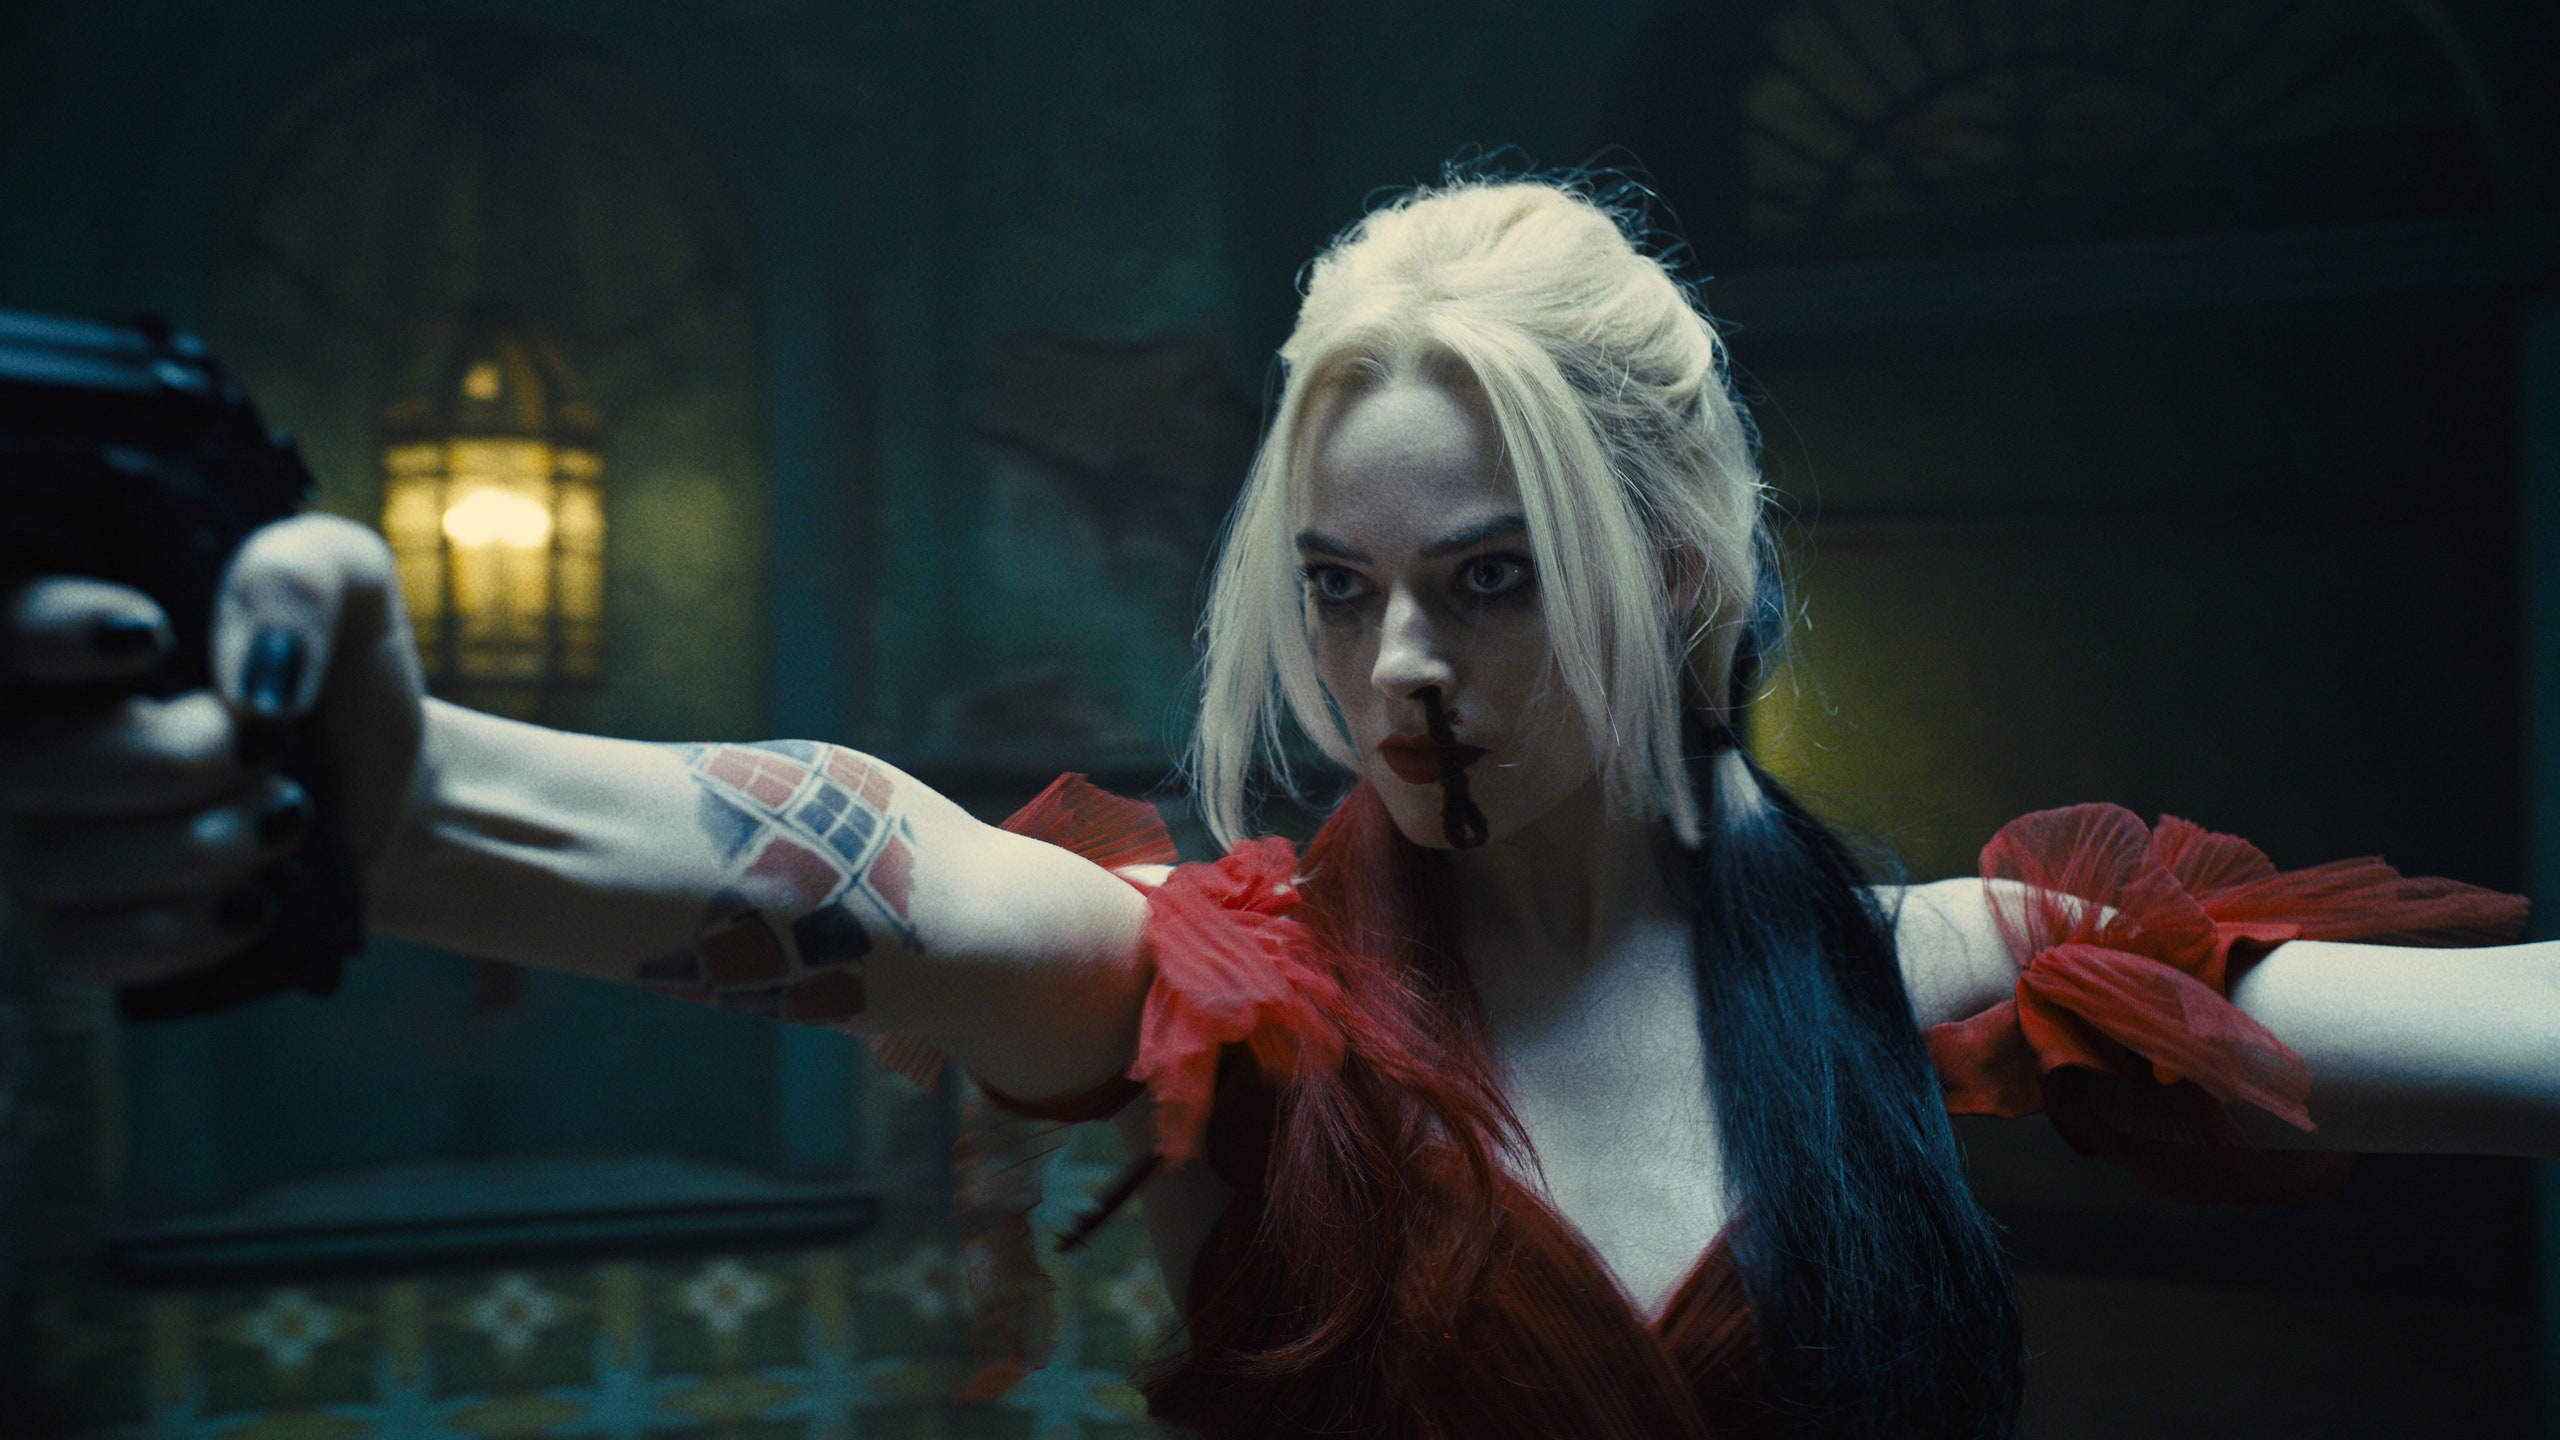 Harley Quinn The Suicide Squad Movie 2021 HD Wallpaper